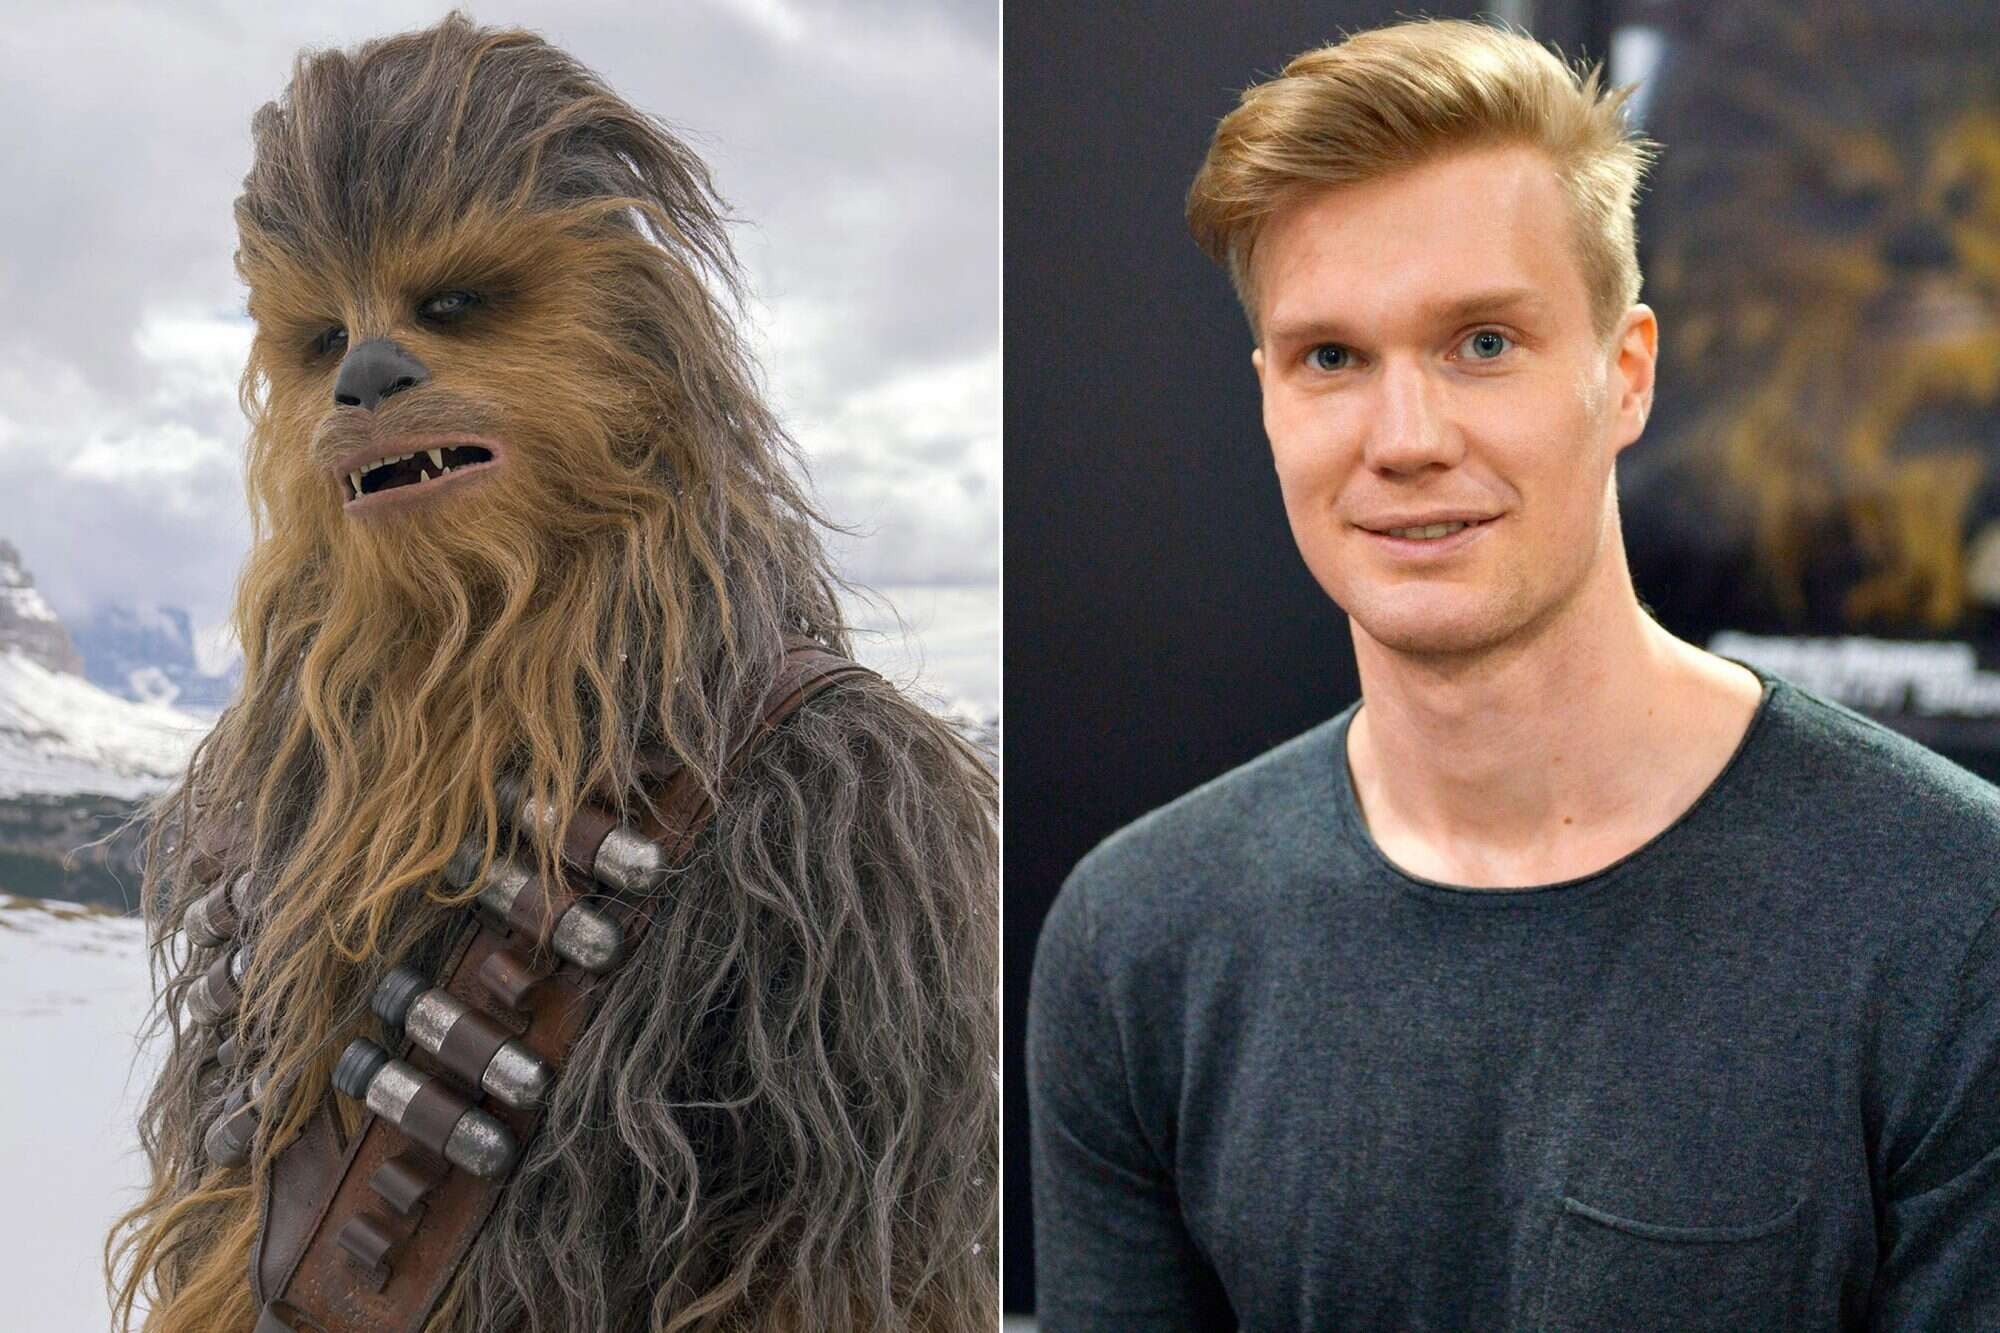 Who Played Chewbacca in Star Wars?